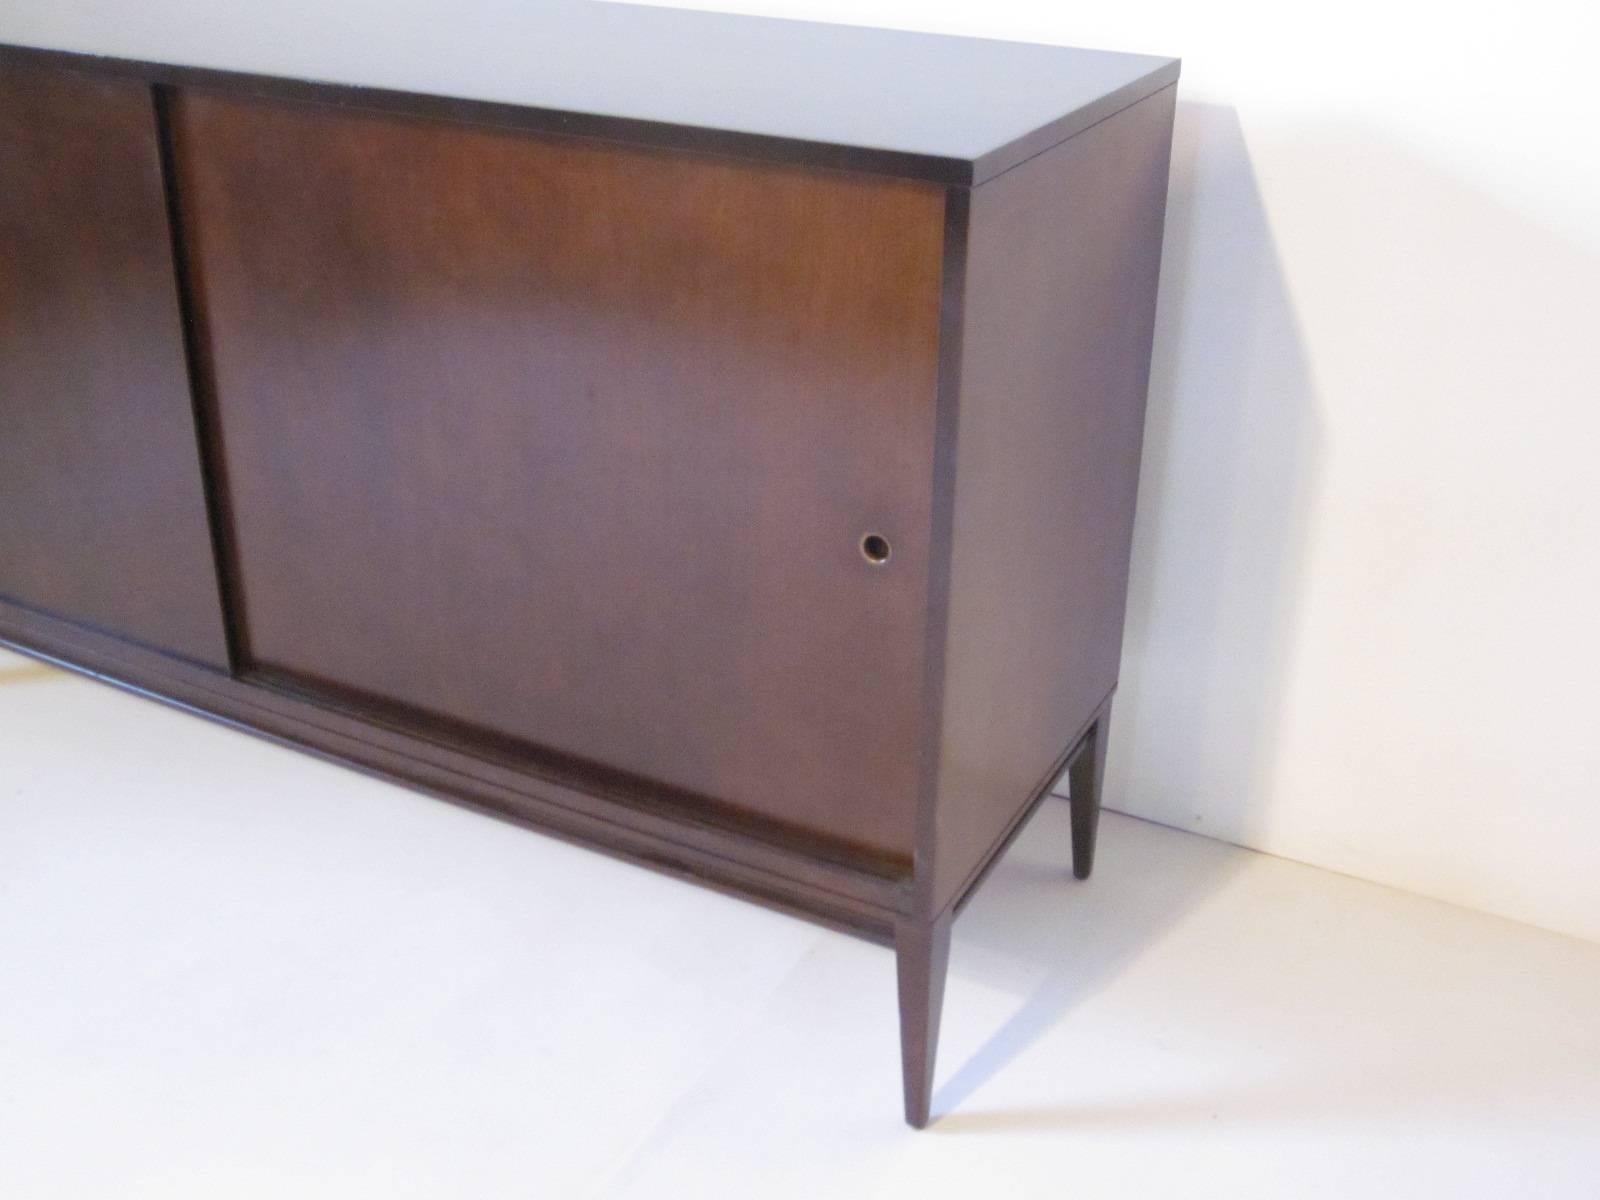 A McCobb dark toned double sliding door credenza with brass hole pulls, four drawers and one adjustable shelve and still retaining it's original foil tag Designed by Paul McCobb for the Winchendon Furniture Company.